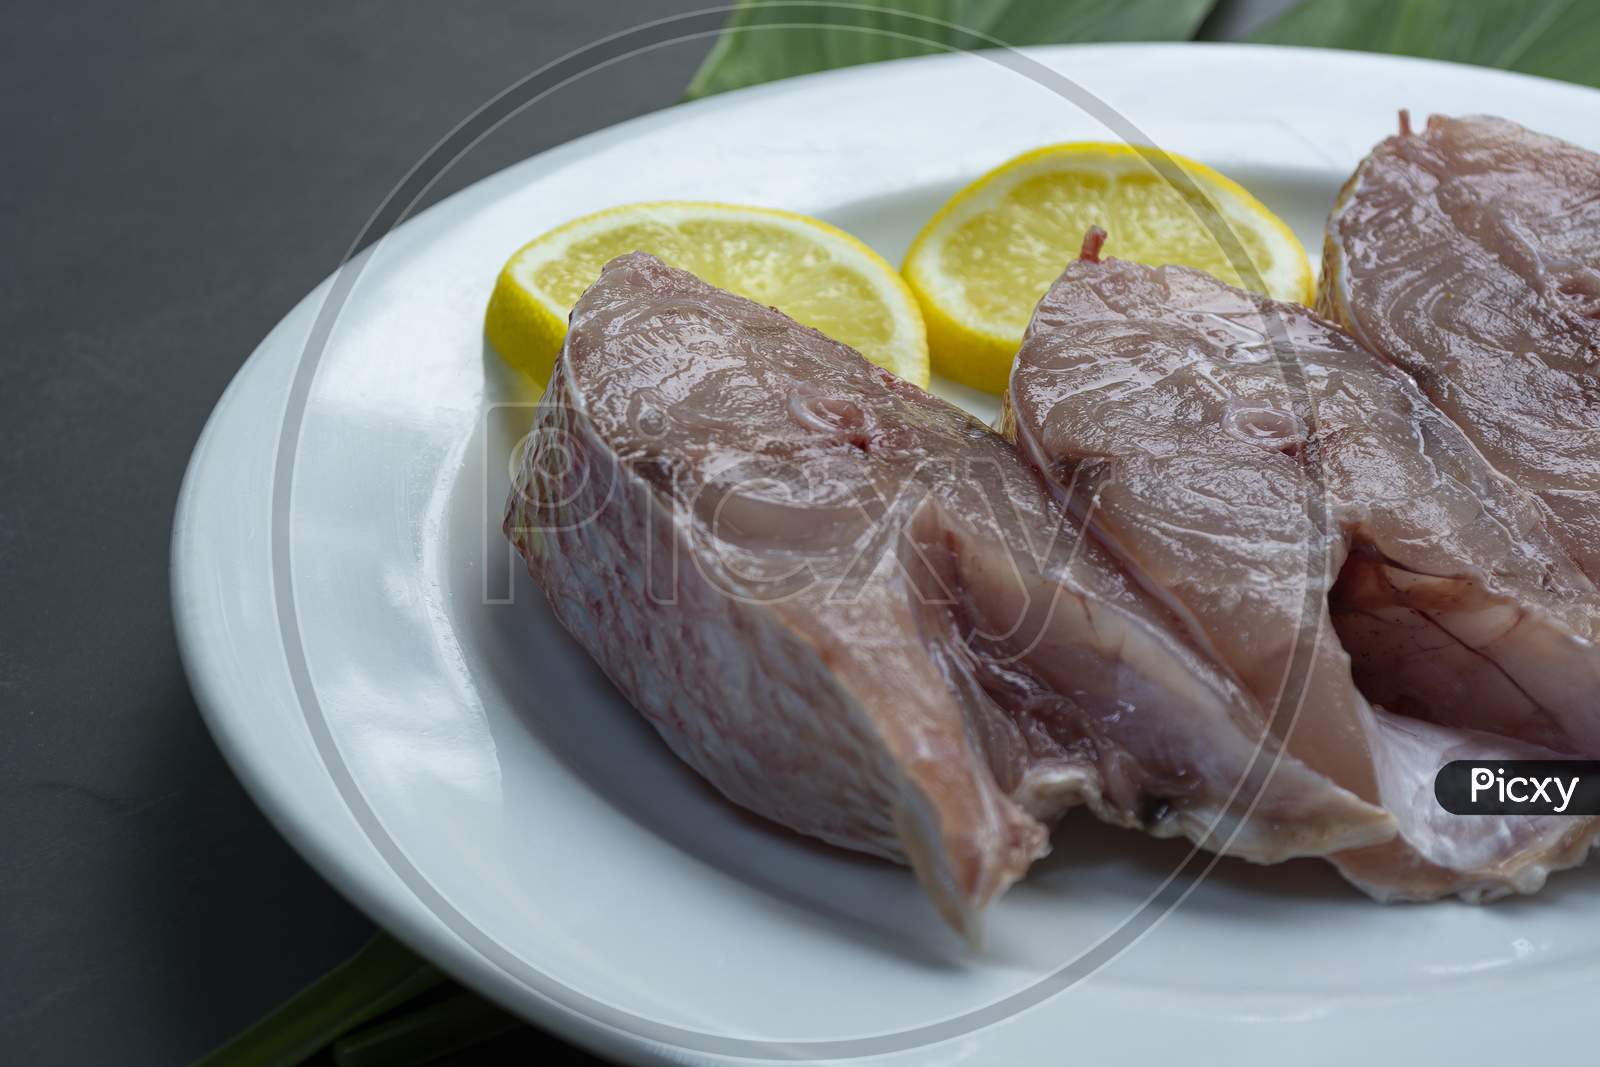 Fresh Raw Fish On White Plate With Green Leaf And Lemon